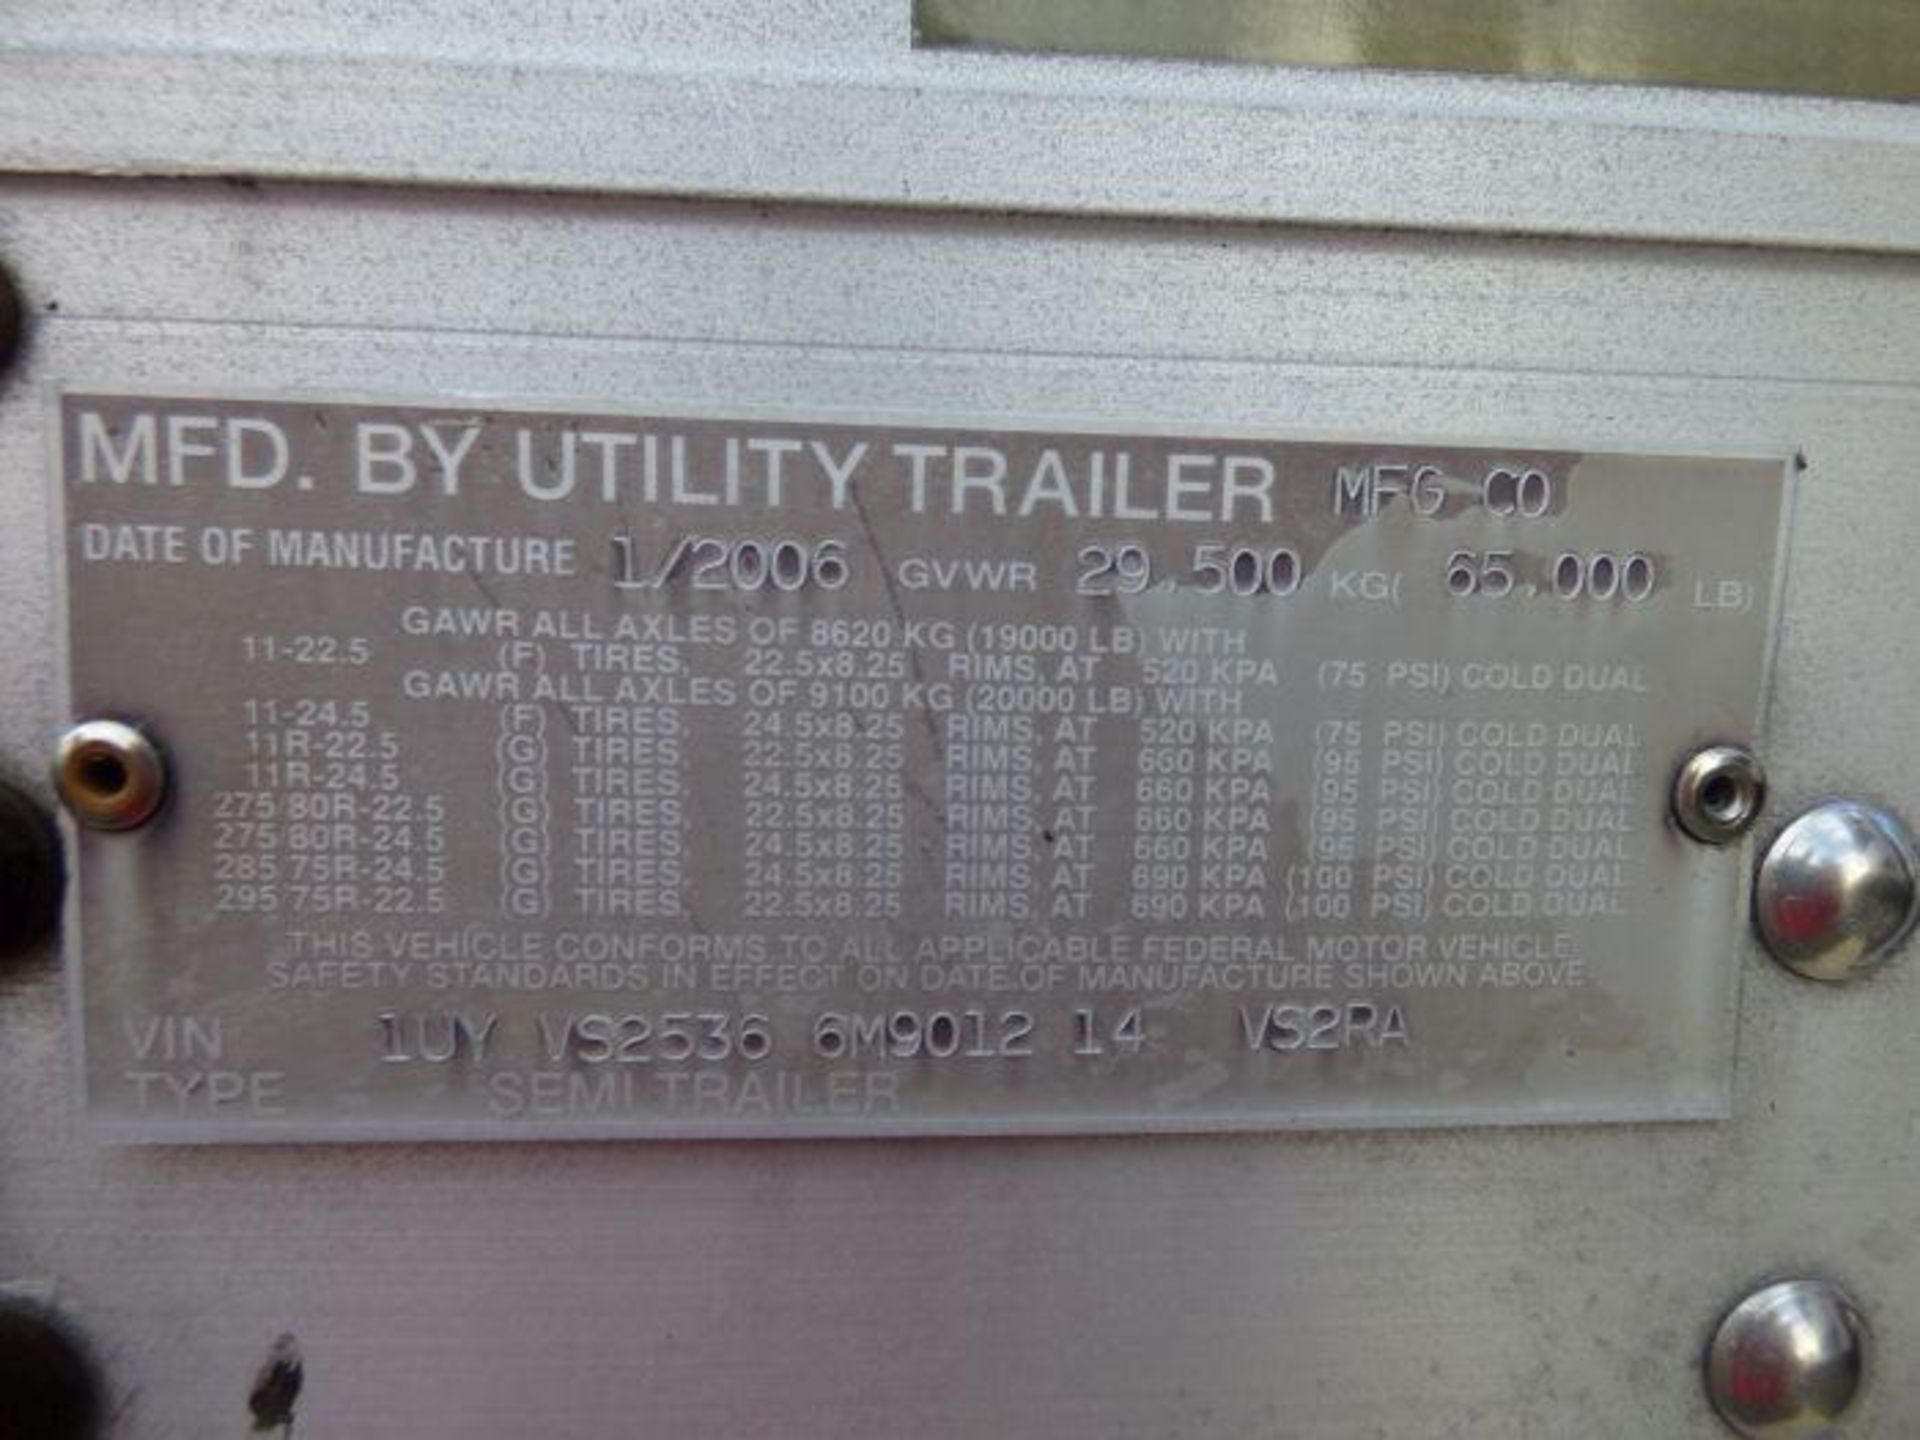 2007 Utility Reefer Trailer, 53 Foot - Image 11 of 13